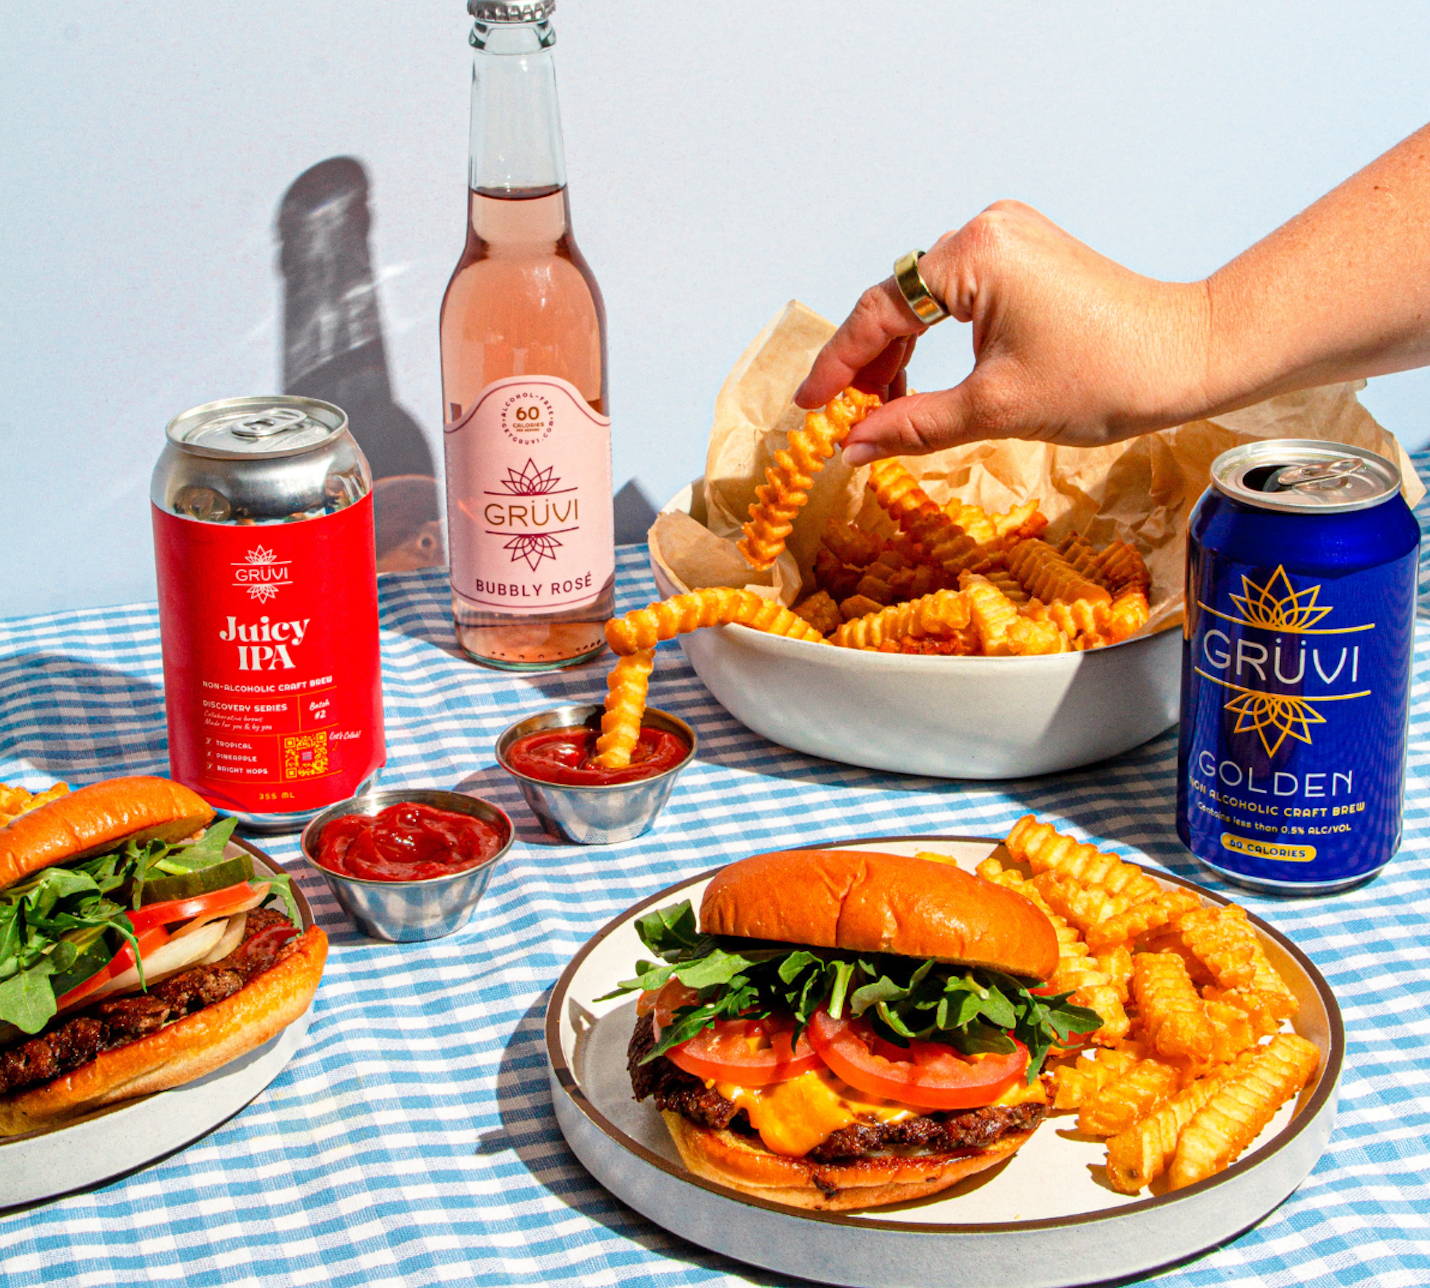 The Ultimate Burger & Bev Pairings for Your Summer Barbecue